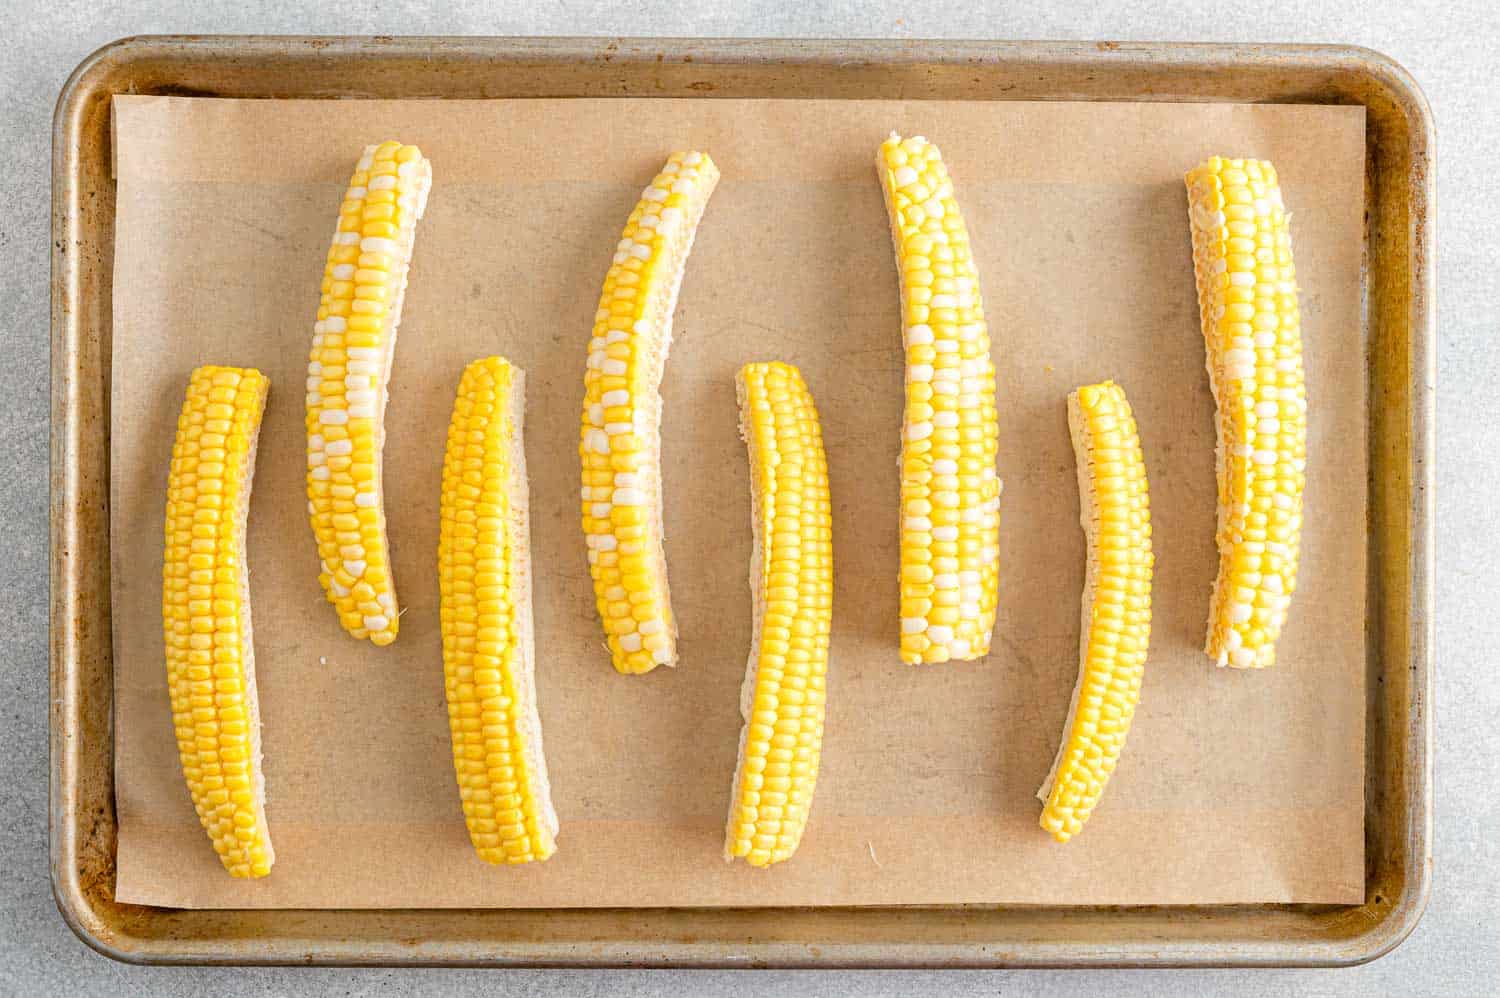 Unseasoned, uncooked corn ribs on a parchment paper lined sheet pan.